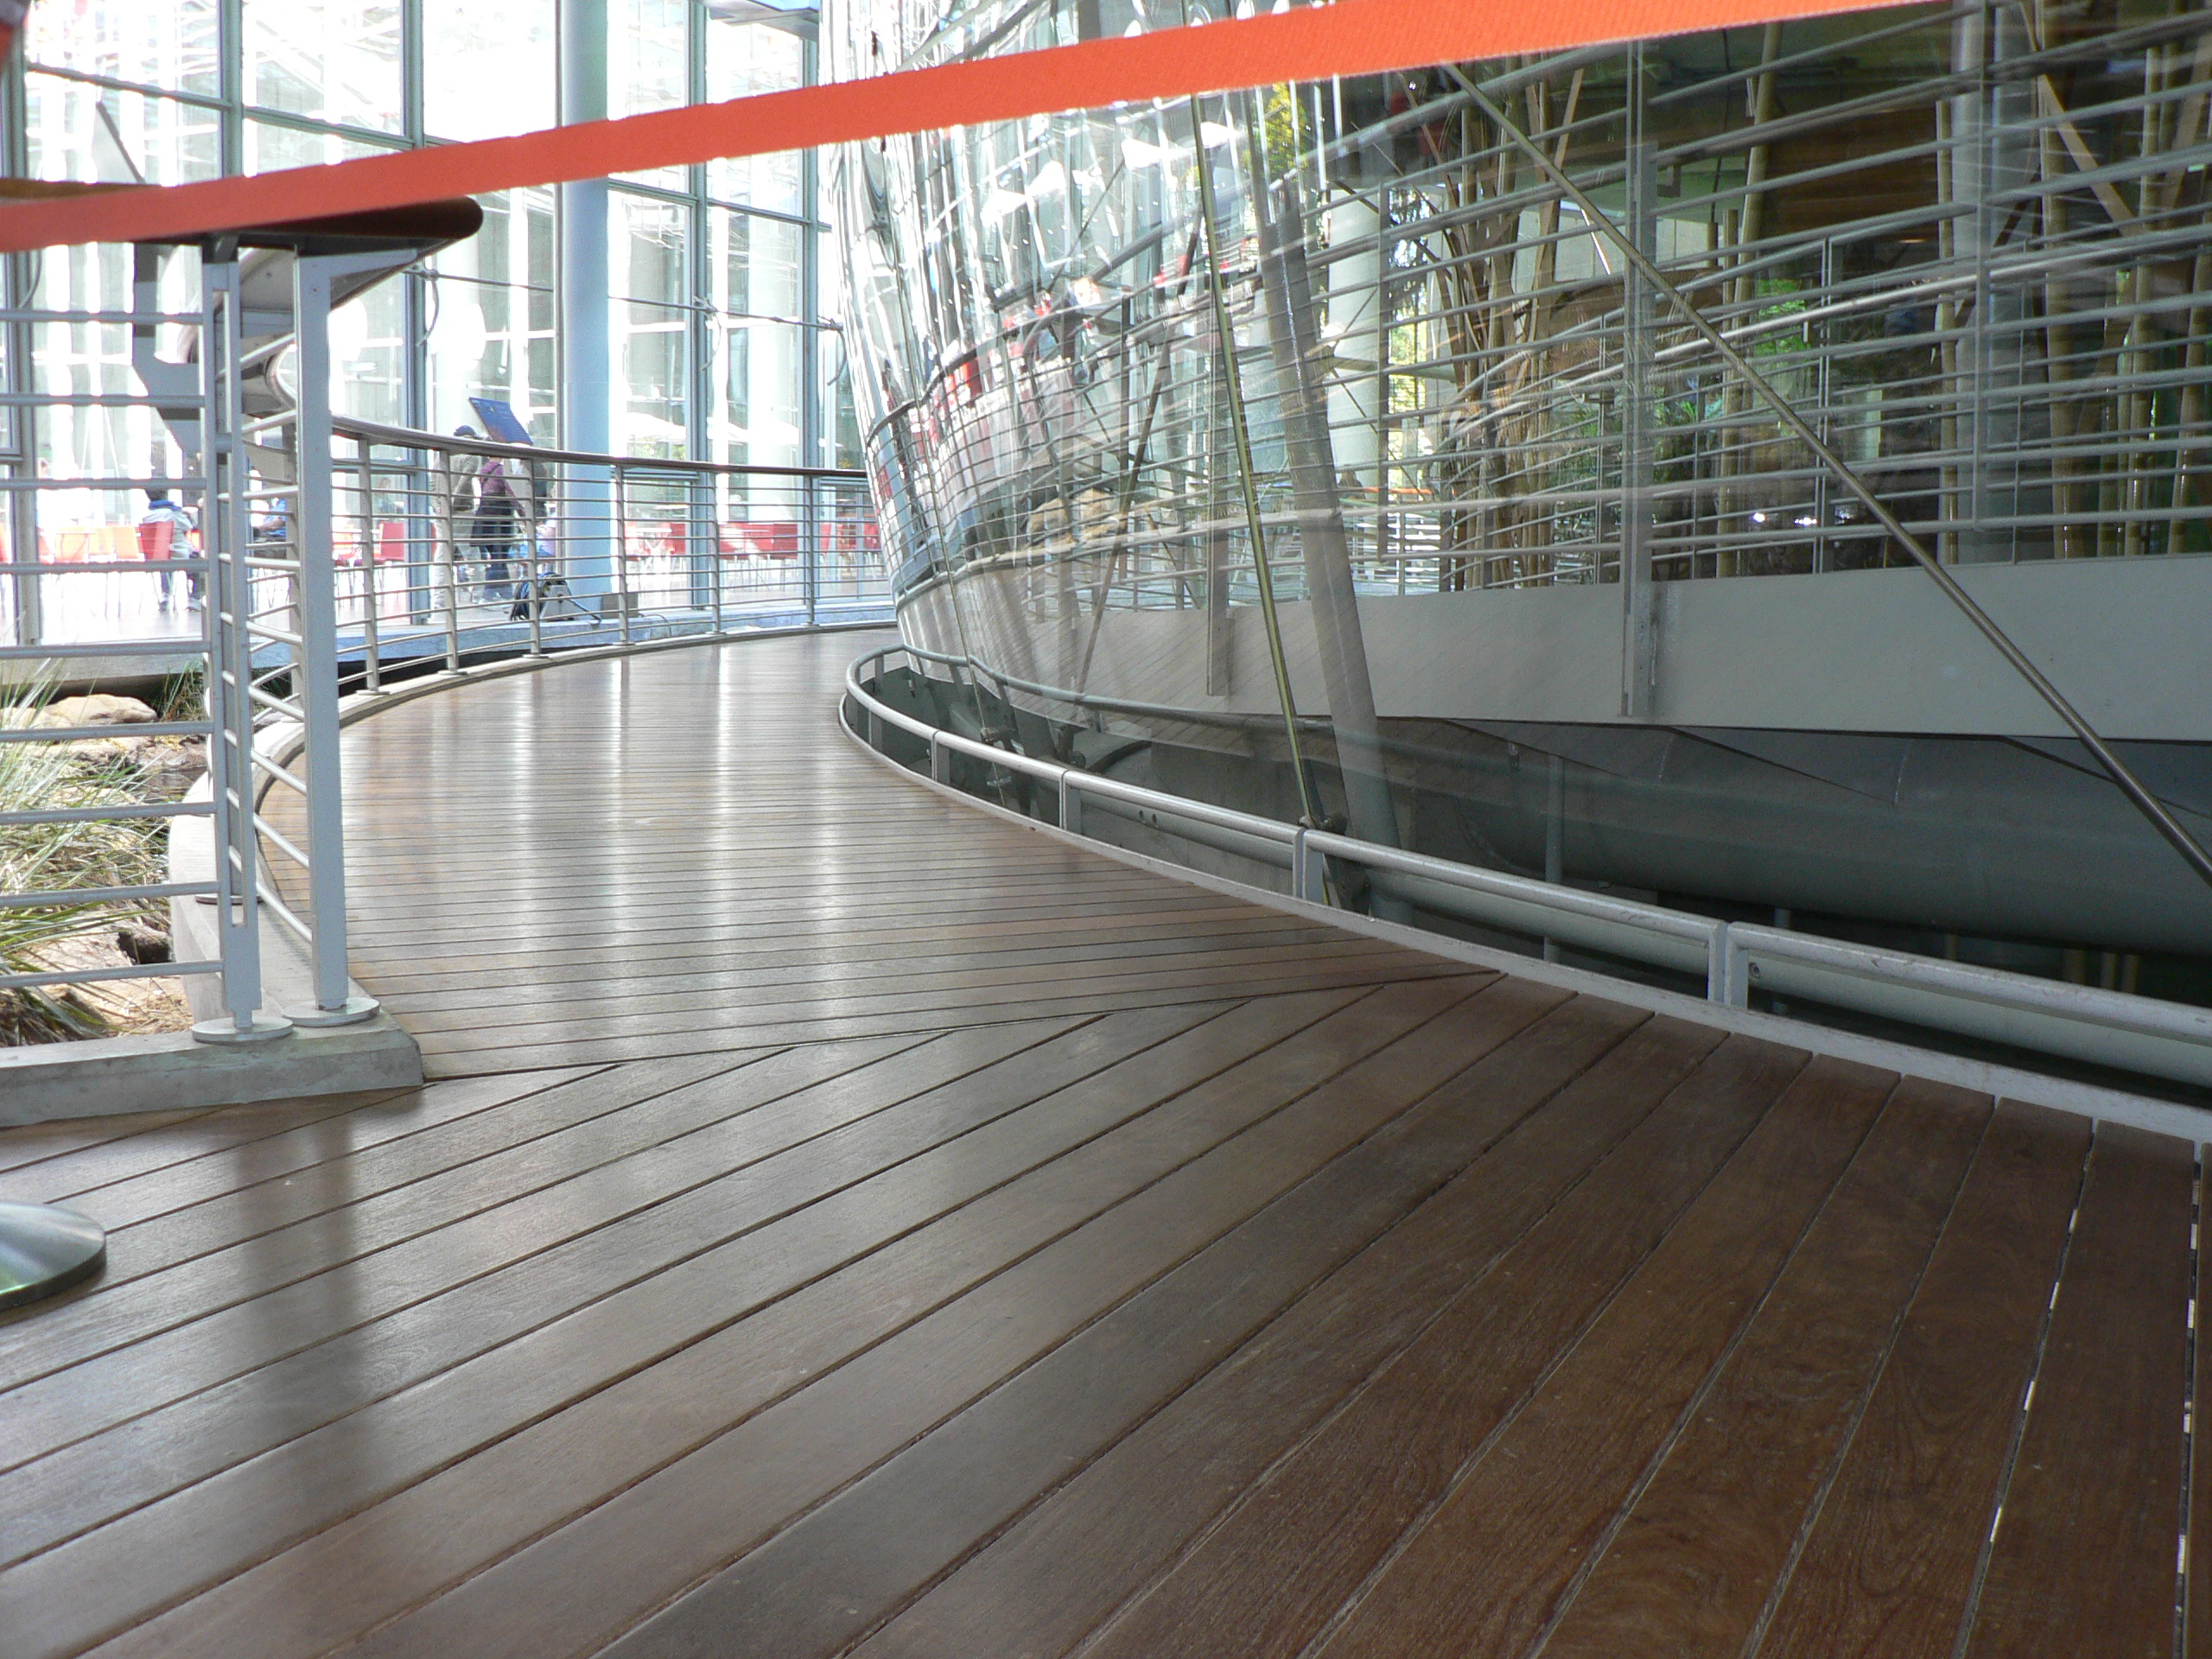 Ipe decking at California Academy of Sciences